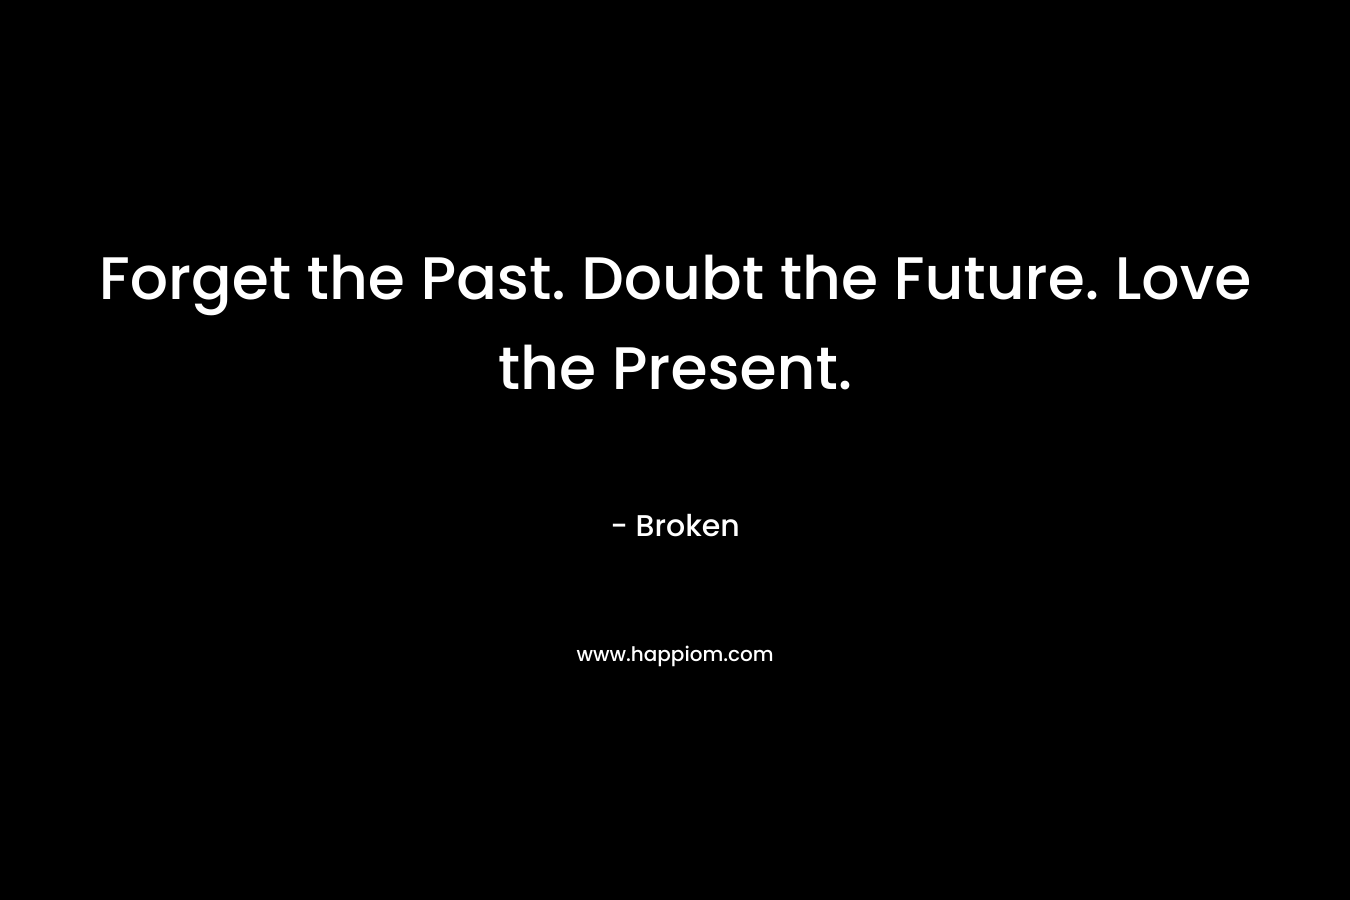 Forget the Past. Doubt the Future. Love the Present.